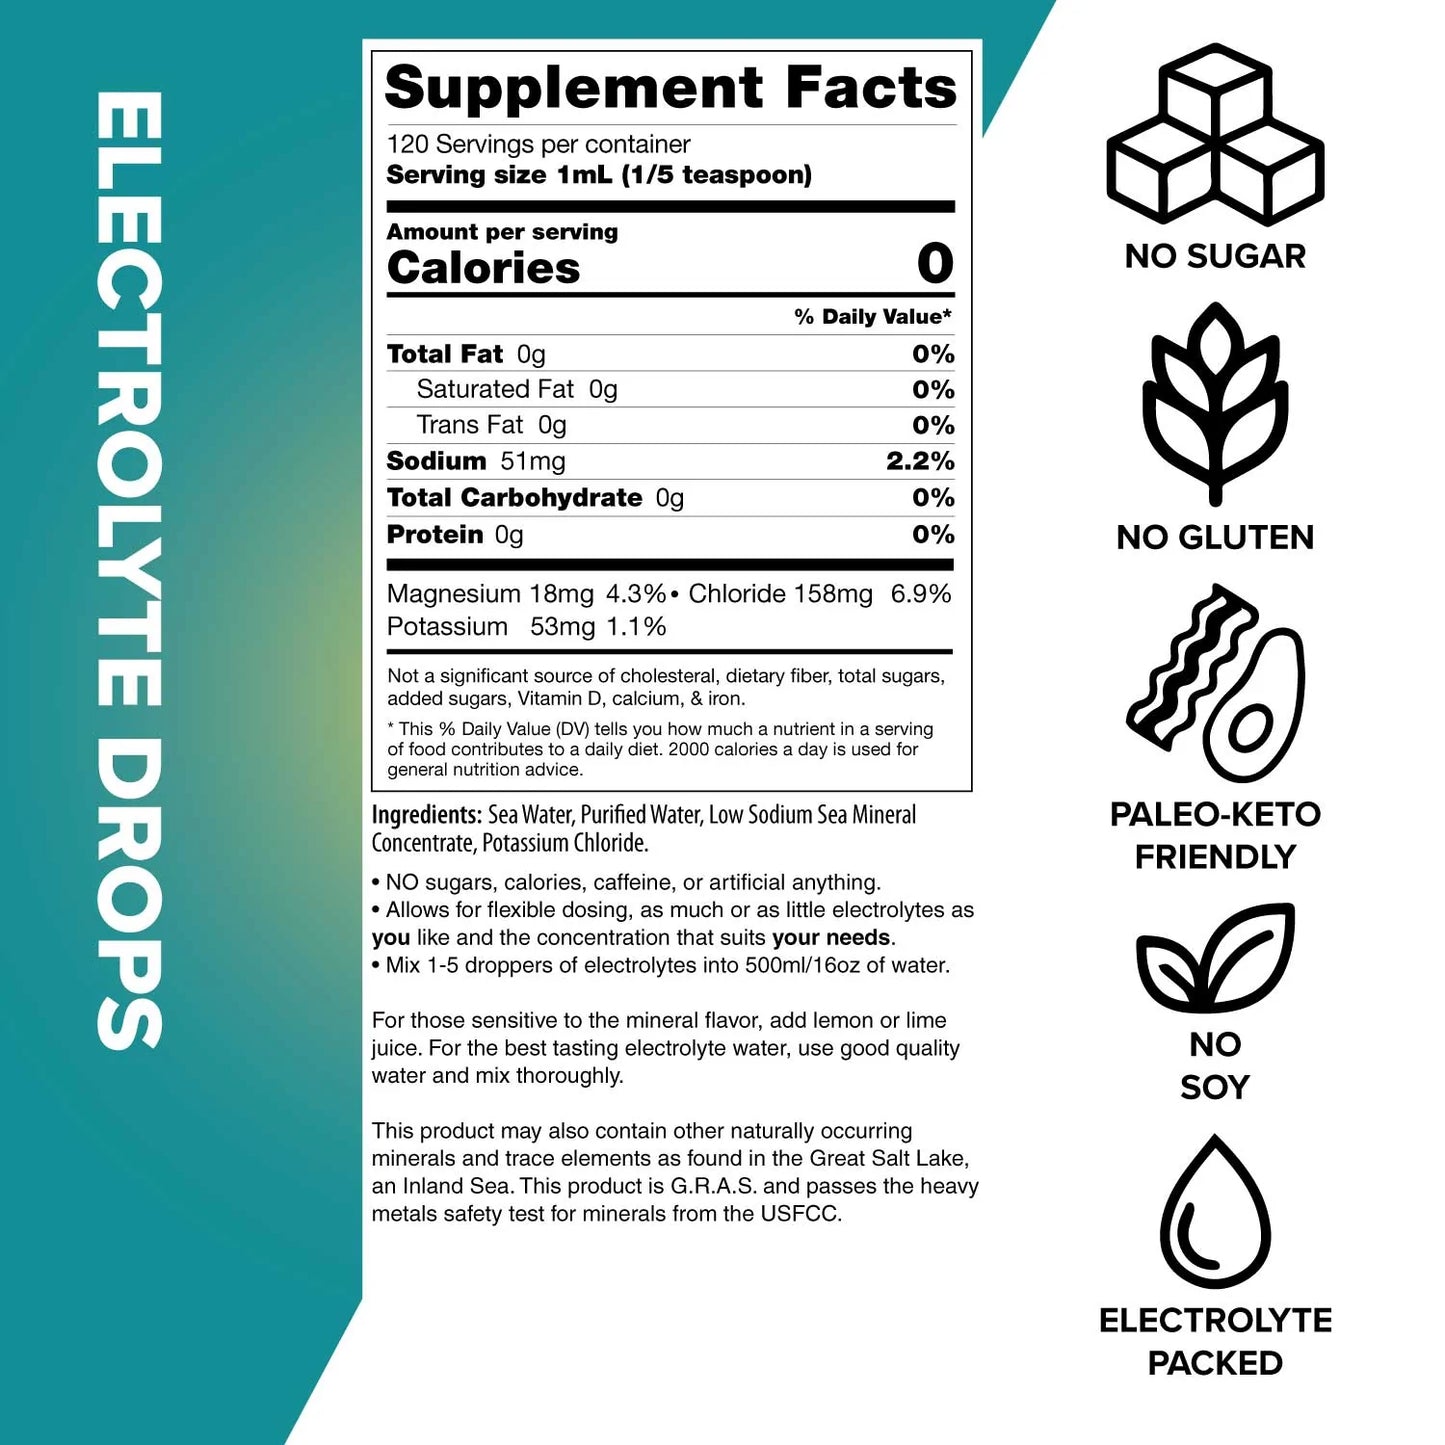 KETO CHOW ELECTROLYTE DROPS & TABLETS